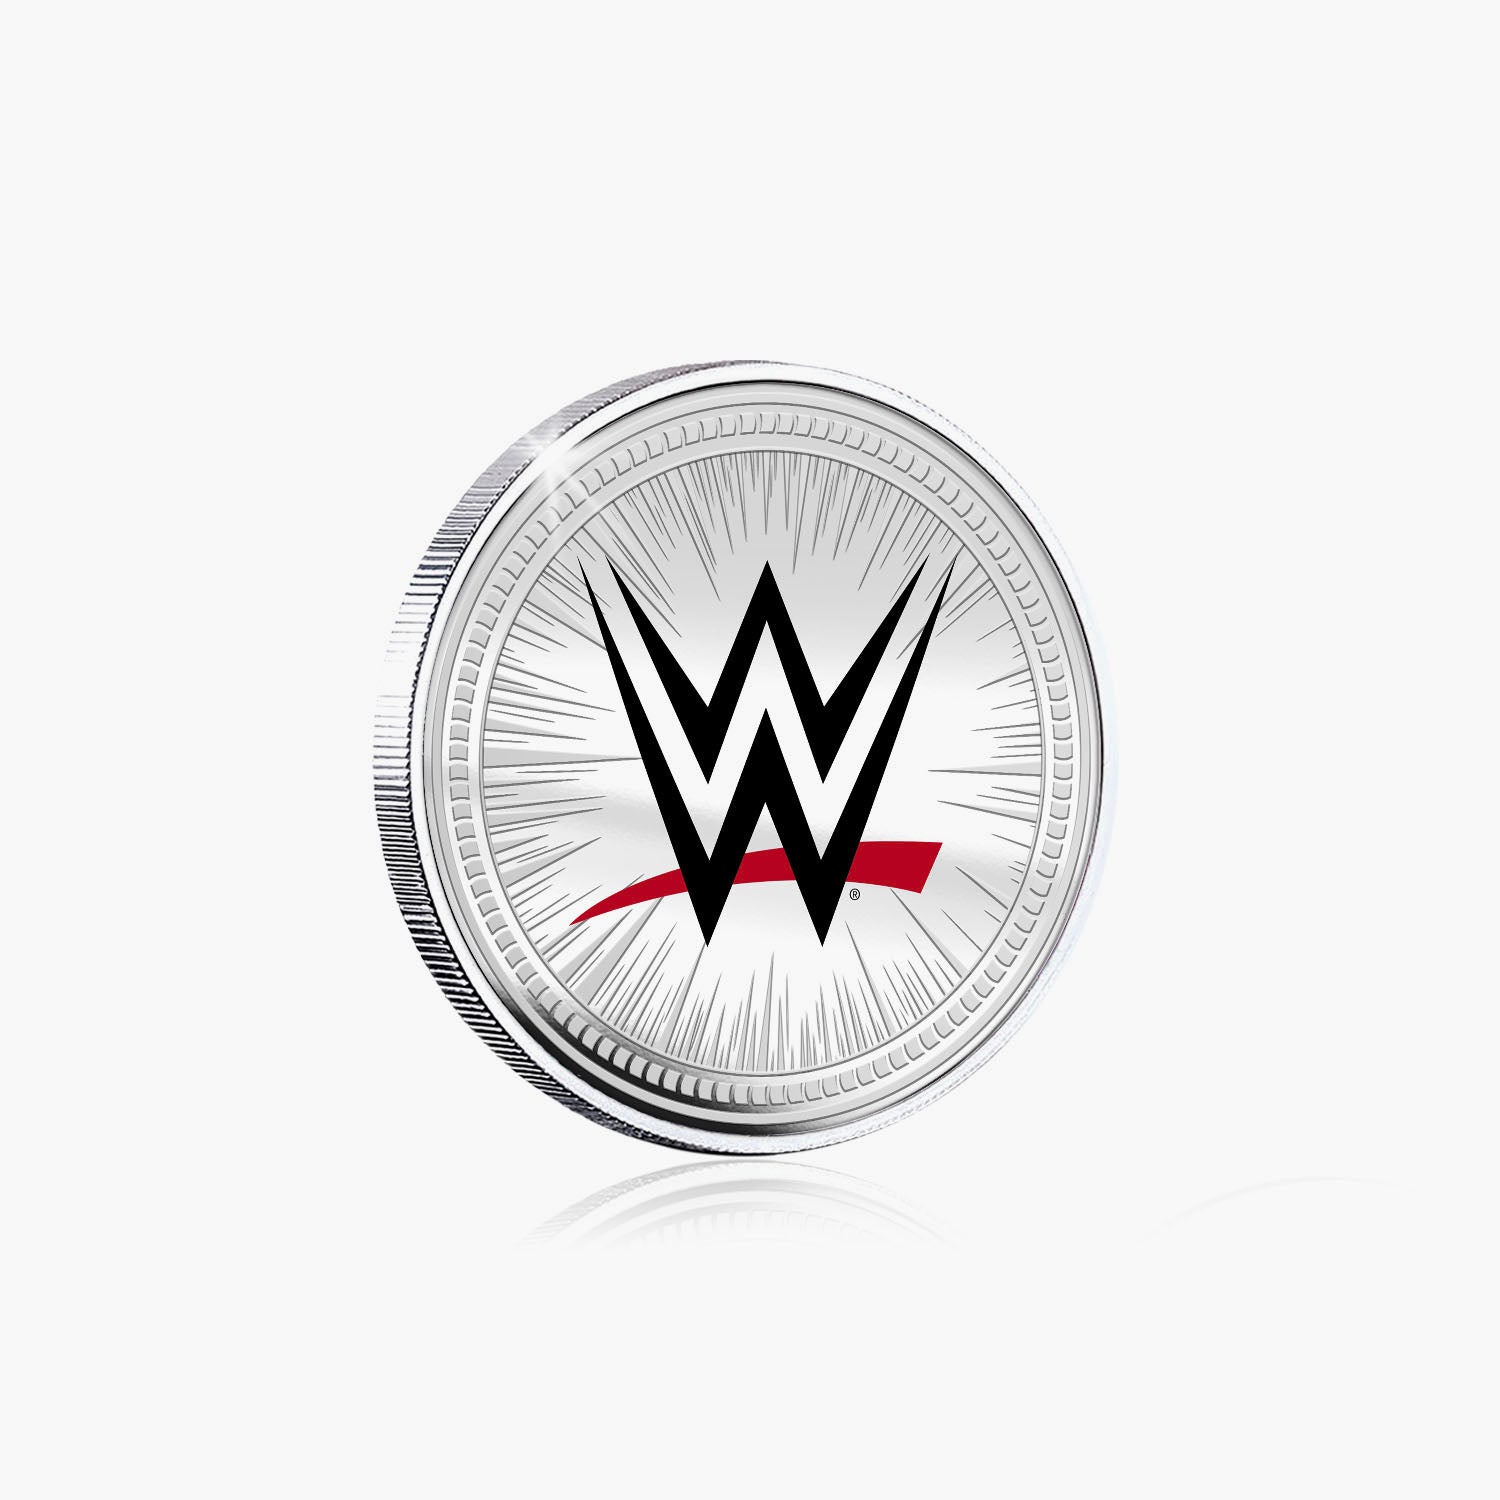 WWE Commemorative Collection - Triple H - 32mm Silver Plated Commemorative